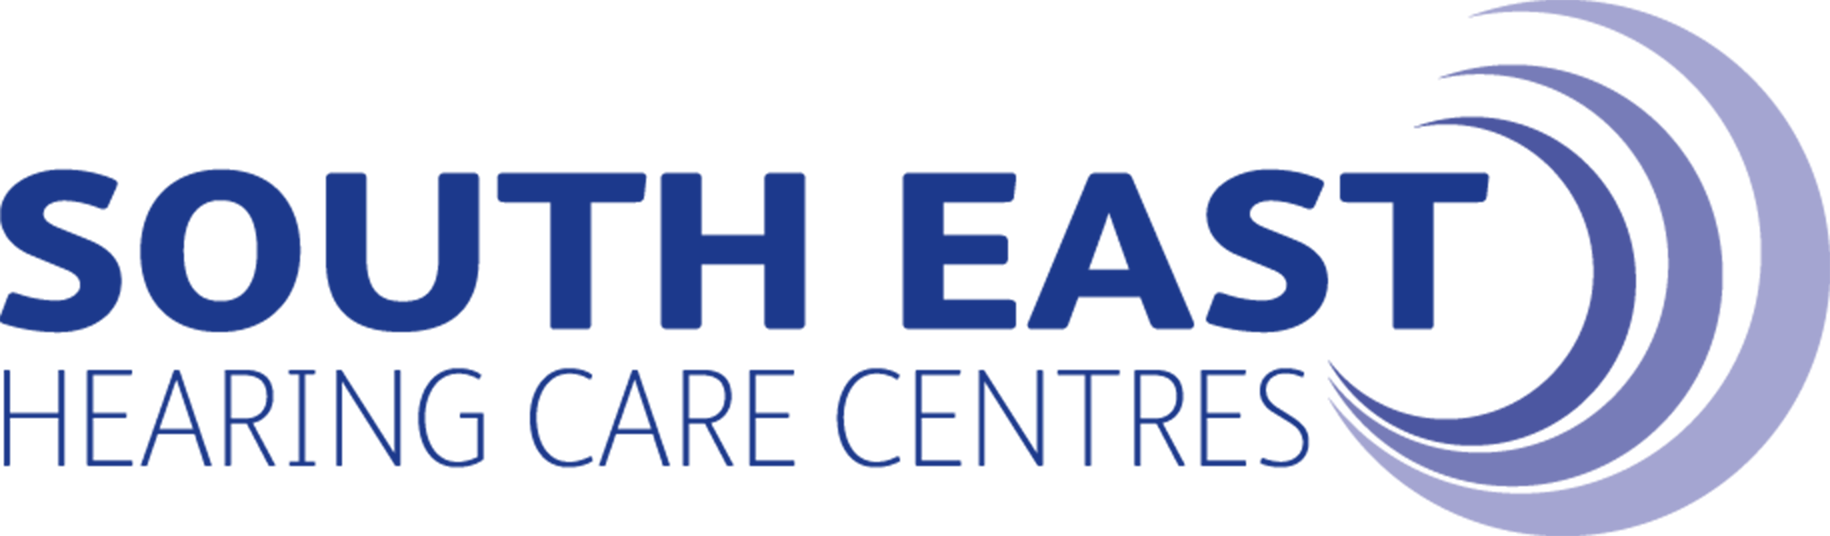 South East Hearing Care Centres